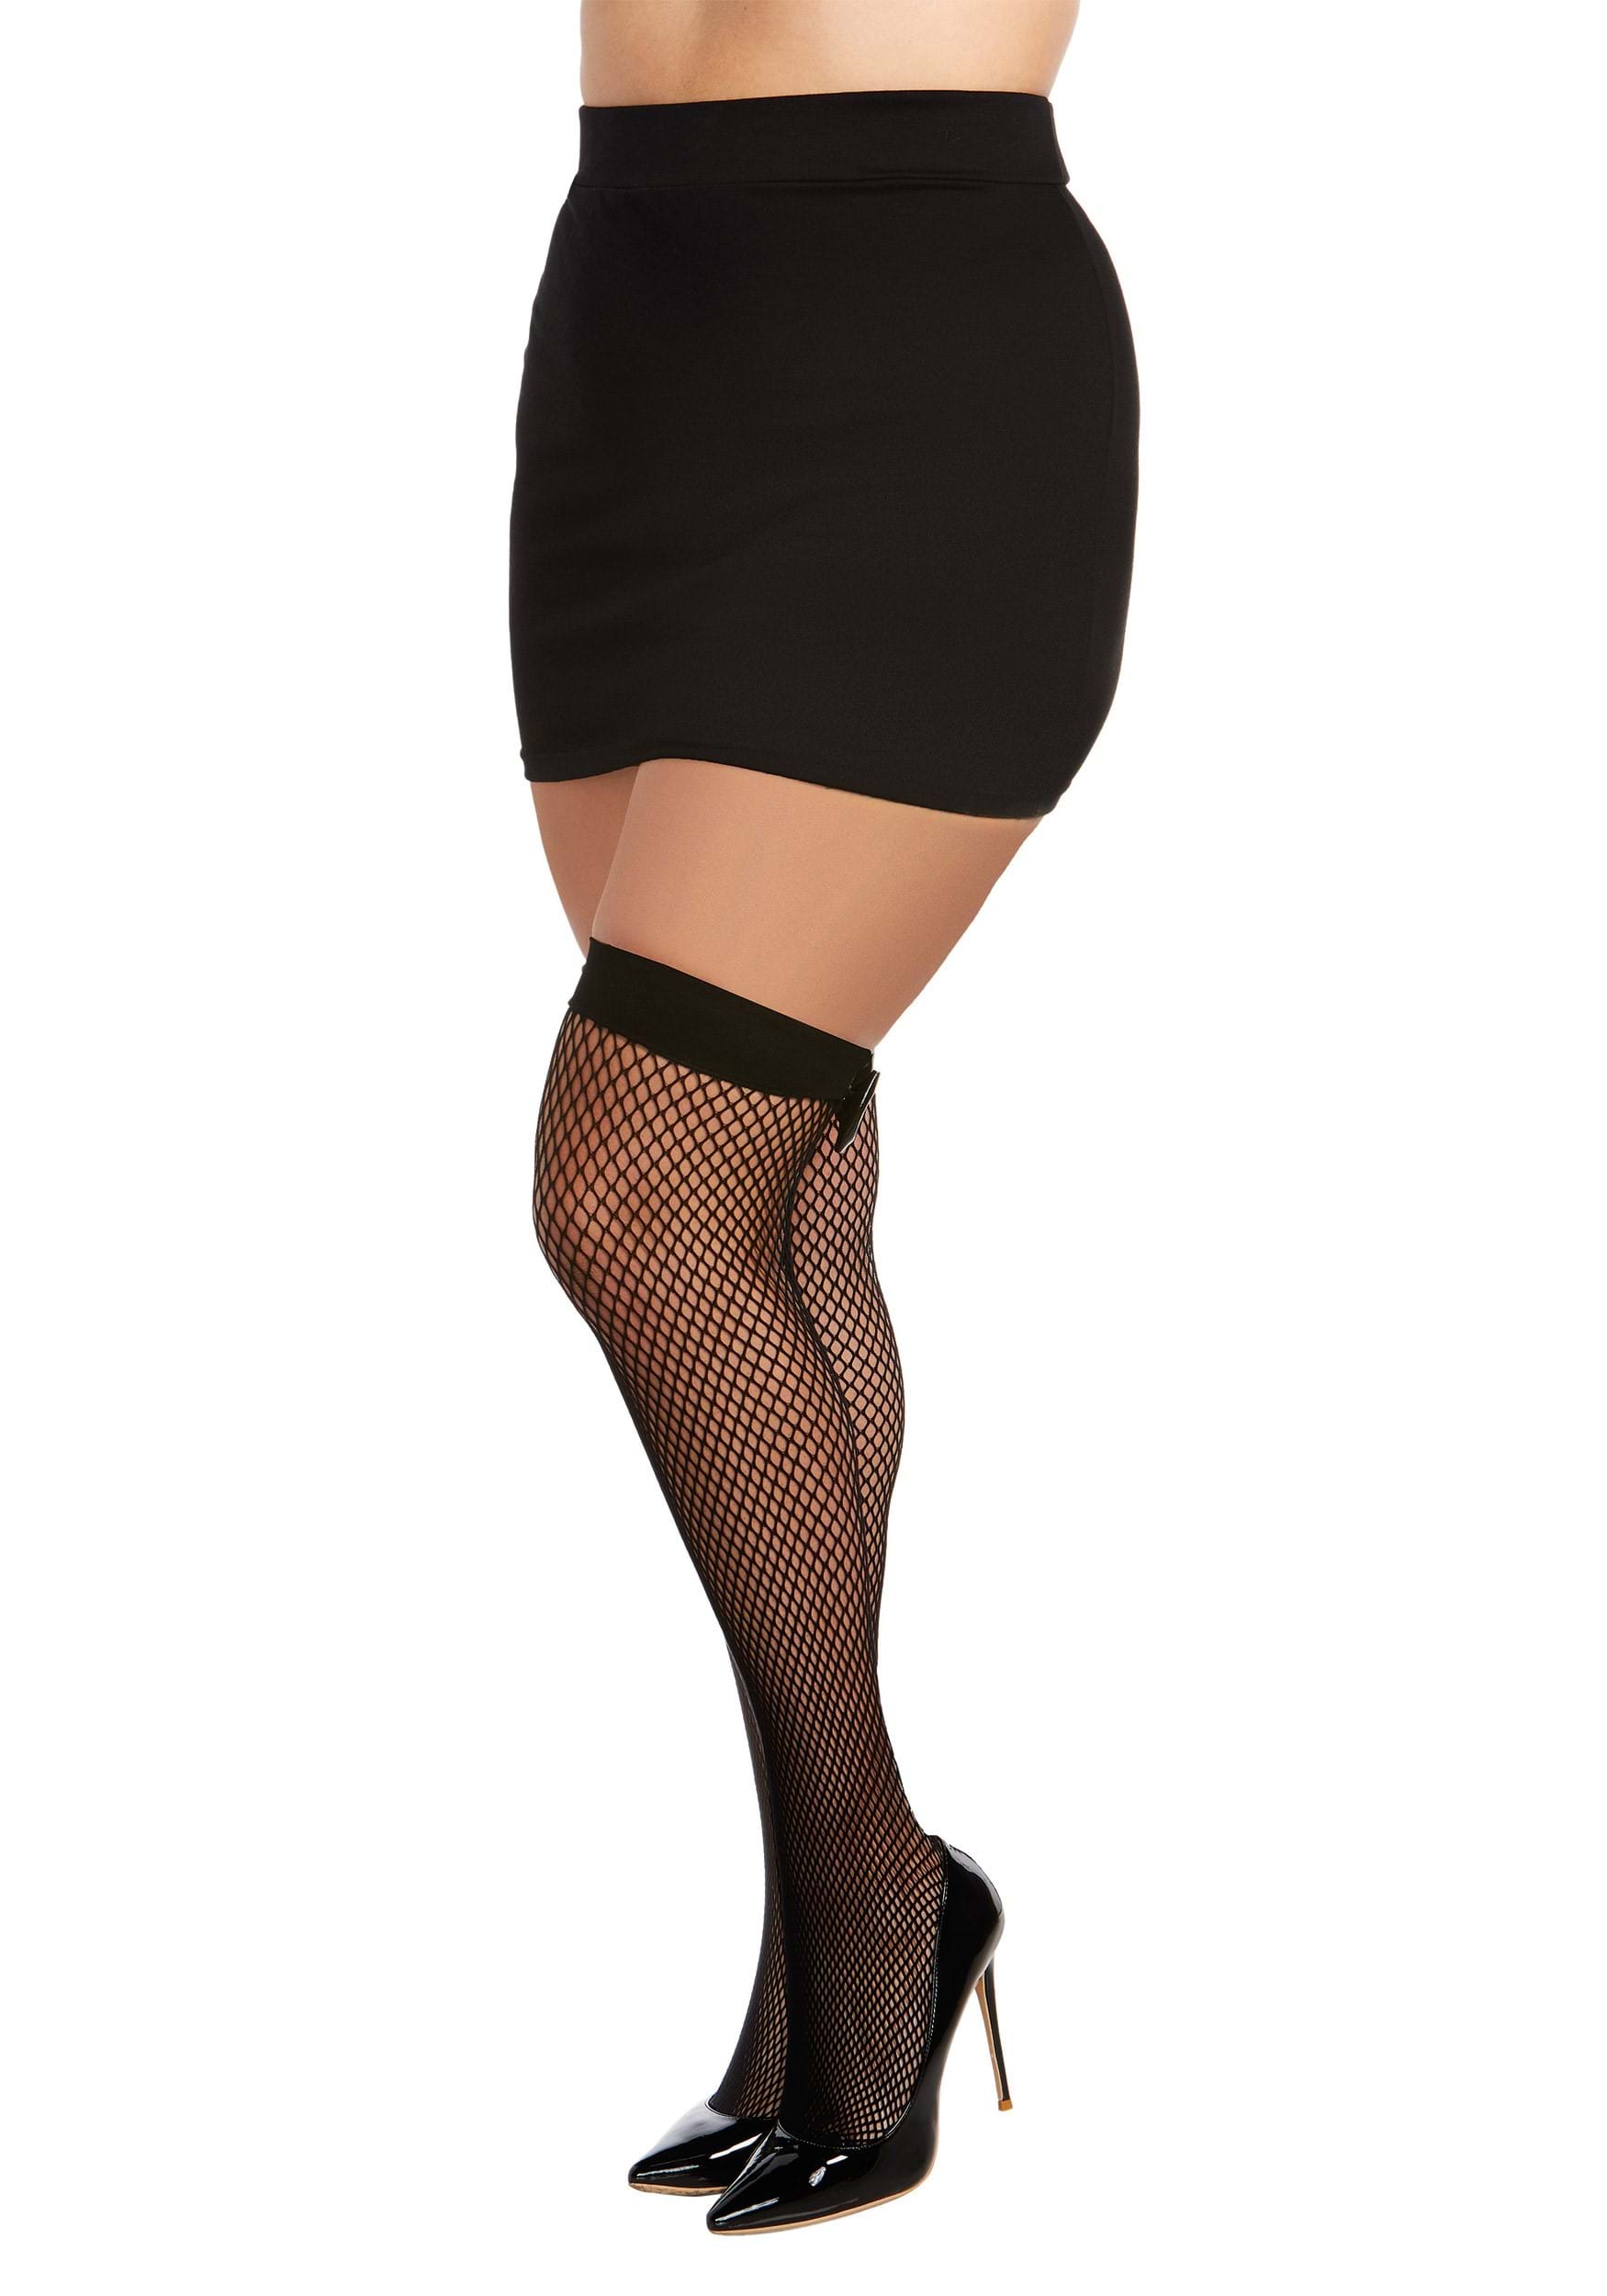 https://images.halloweencostumes.com/products/92711/1-1/womens-plus-black-thigh-high-fishnets-with-back-s.jpg